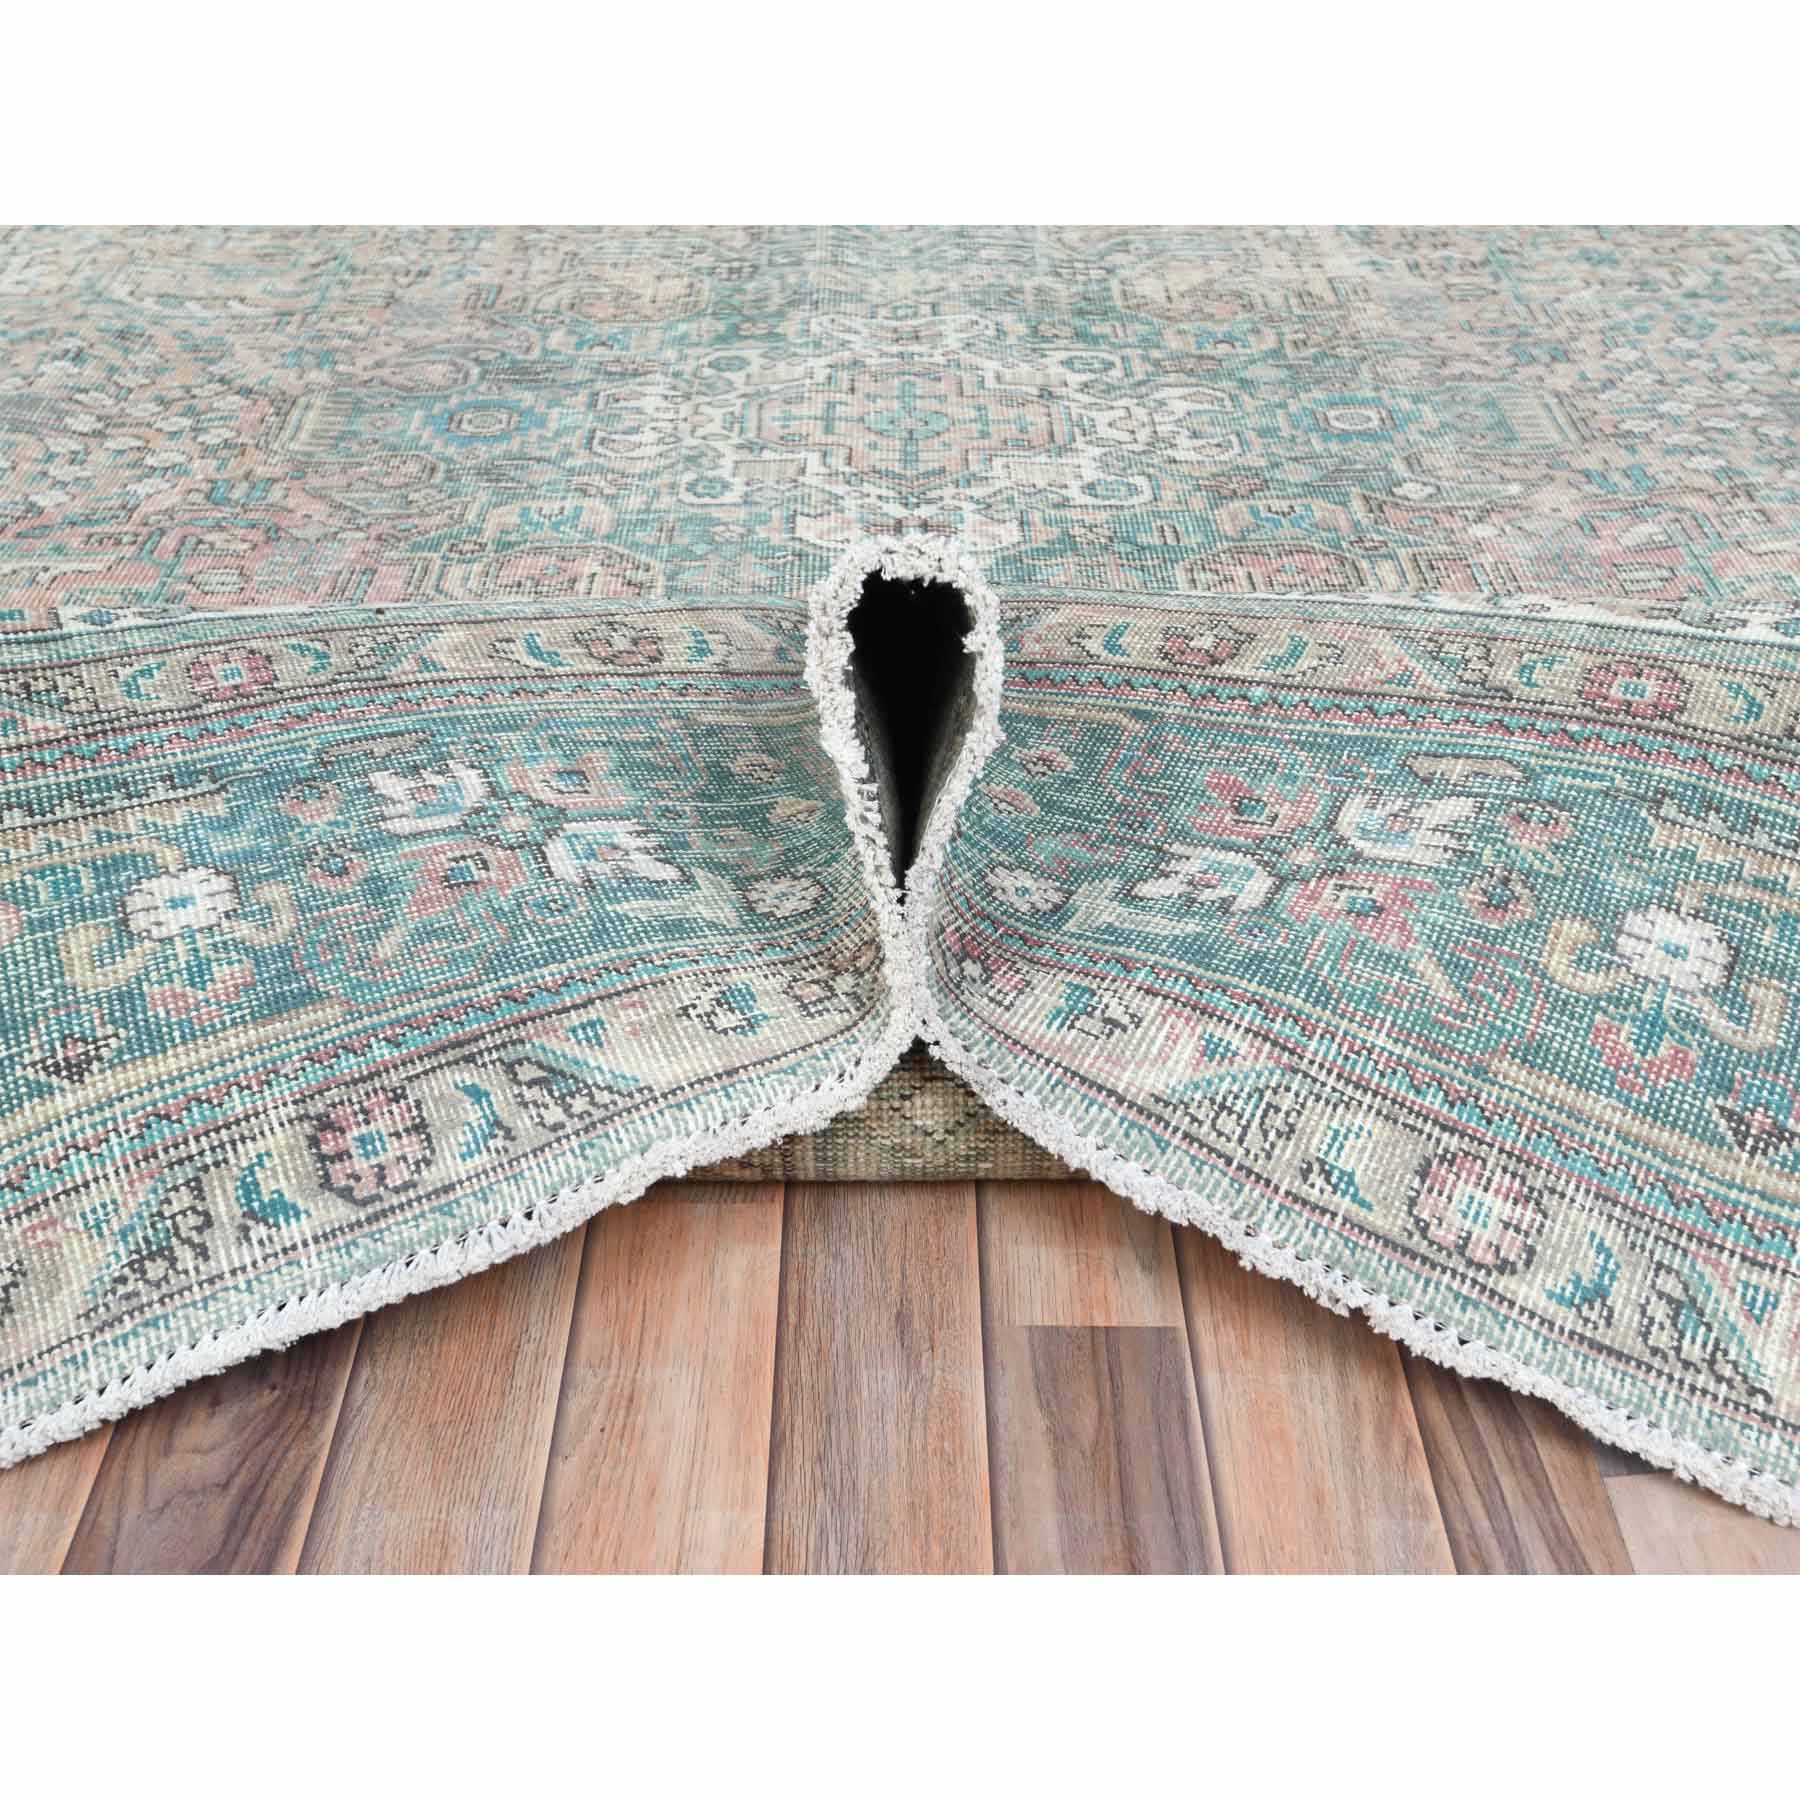 Overdyed-Vintage-Hand-Knotted-Rug-405530